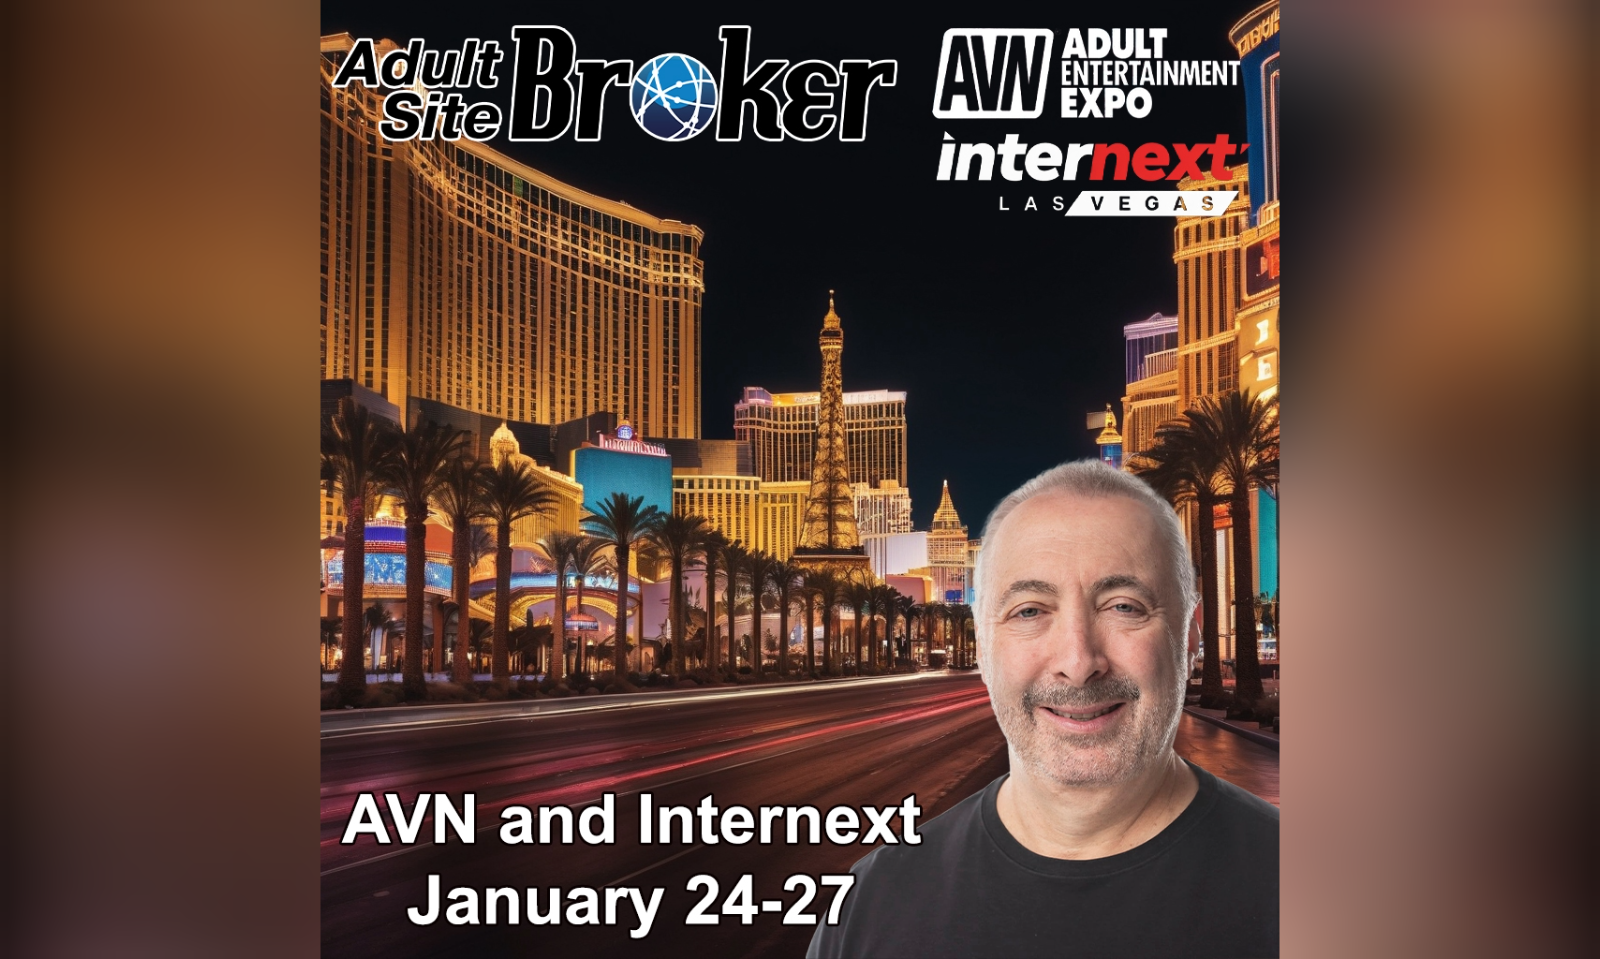 Adult Site Broker to Attend Internext and AVN Expo